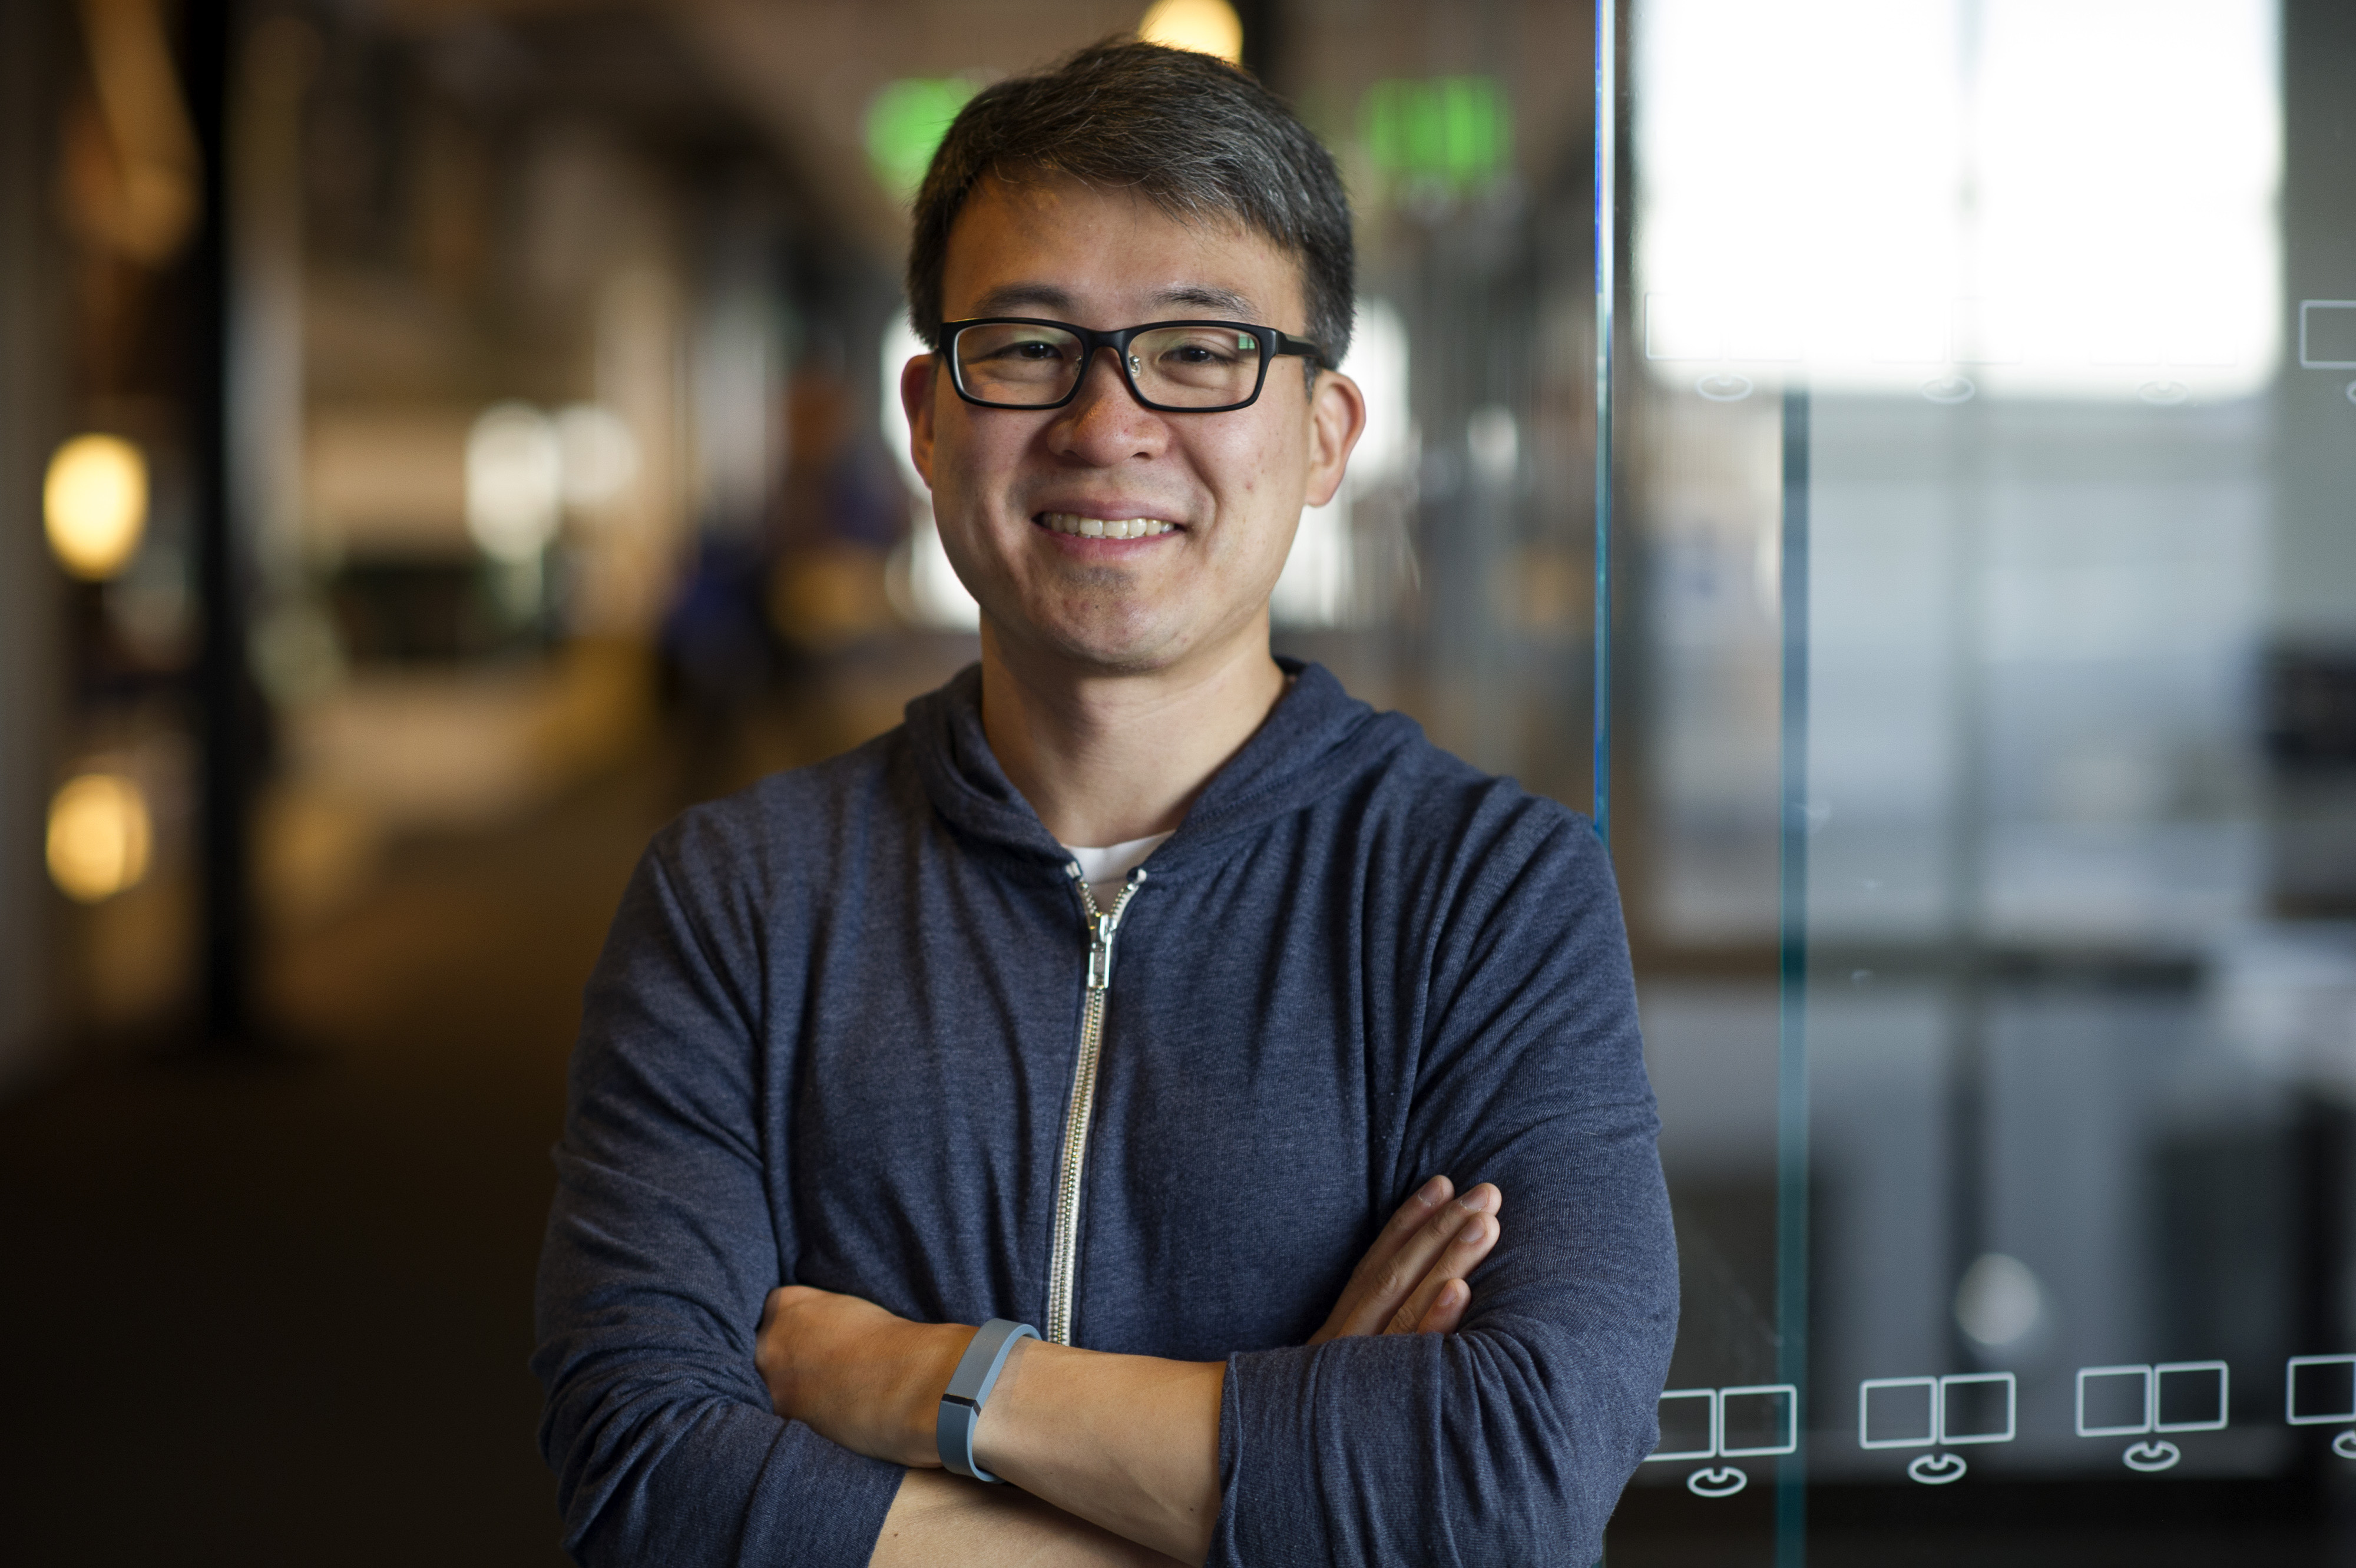 James Park, co-founder and chief executive officer of Fitbit Inc. in San Francisco on Aug. 22, 2014. (David Paul Morris—Bloomberg/Getty Images)